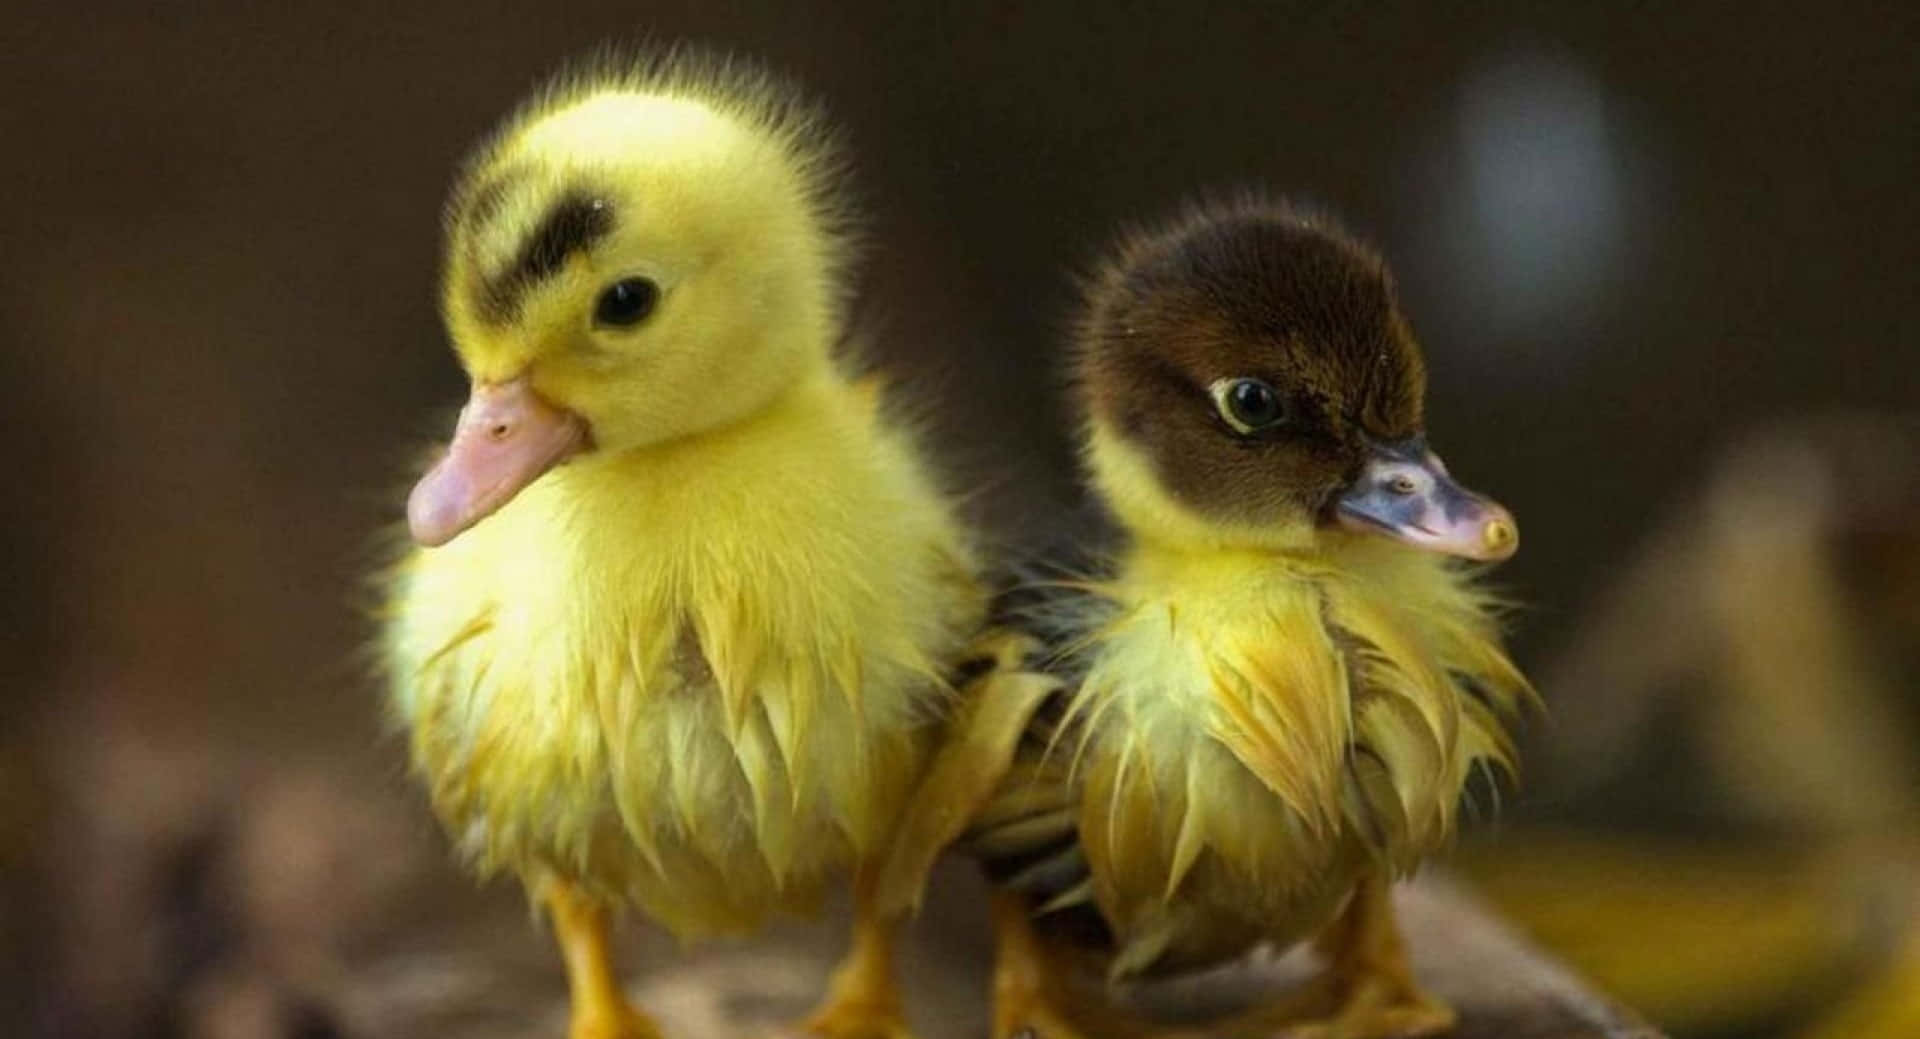 "This Cute Duck is an Adorable Joy" Wallpaper